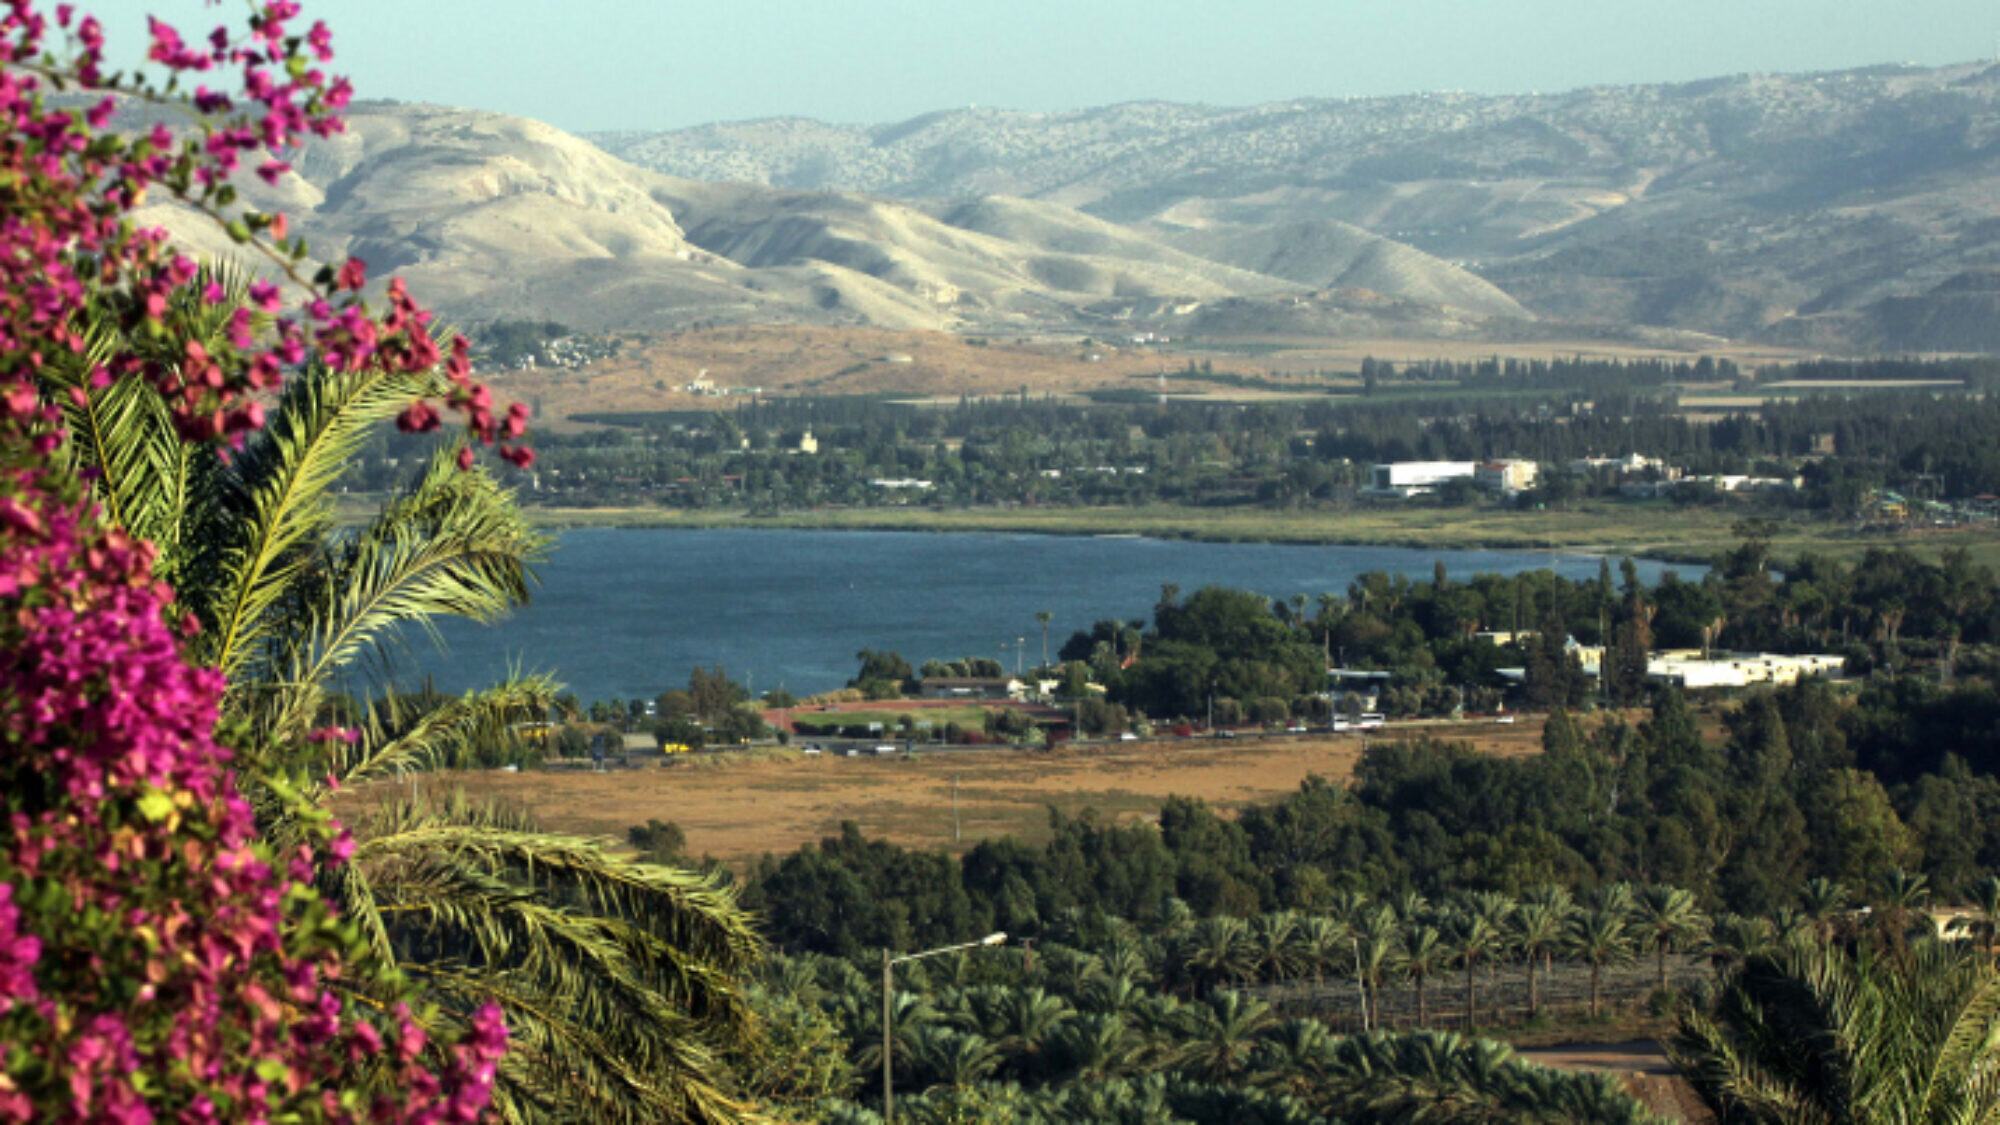 Sea of Galilee water level hits 16year high point